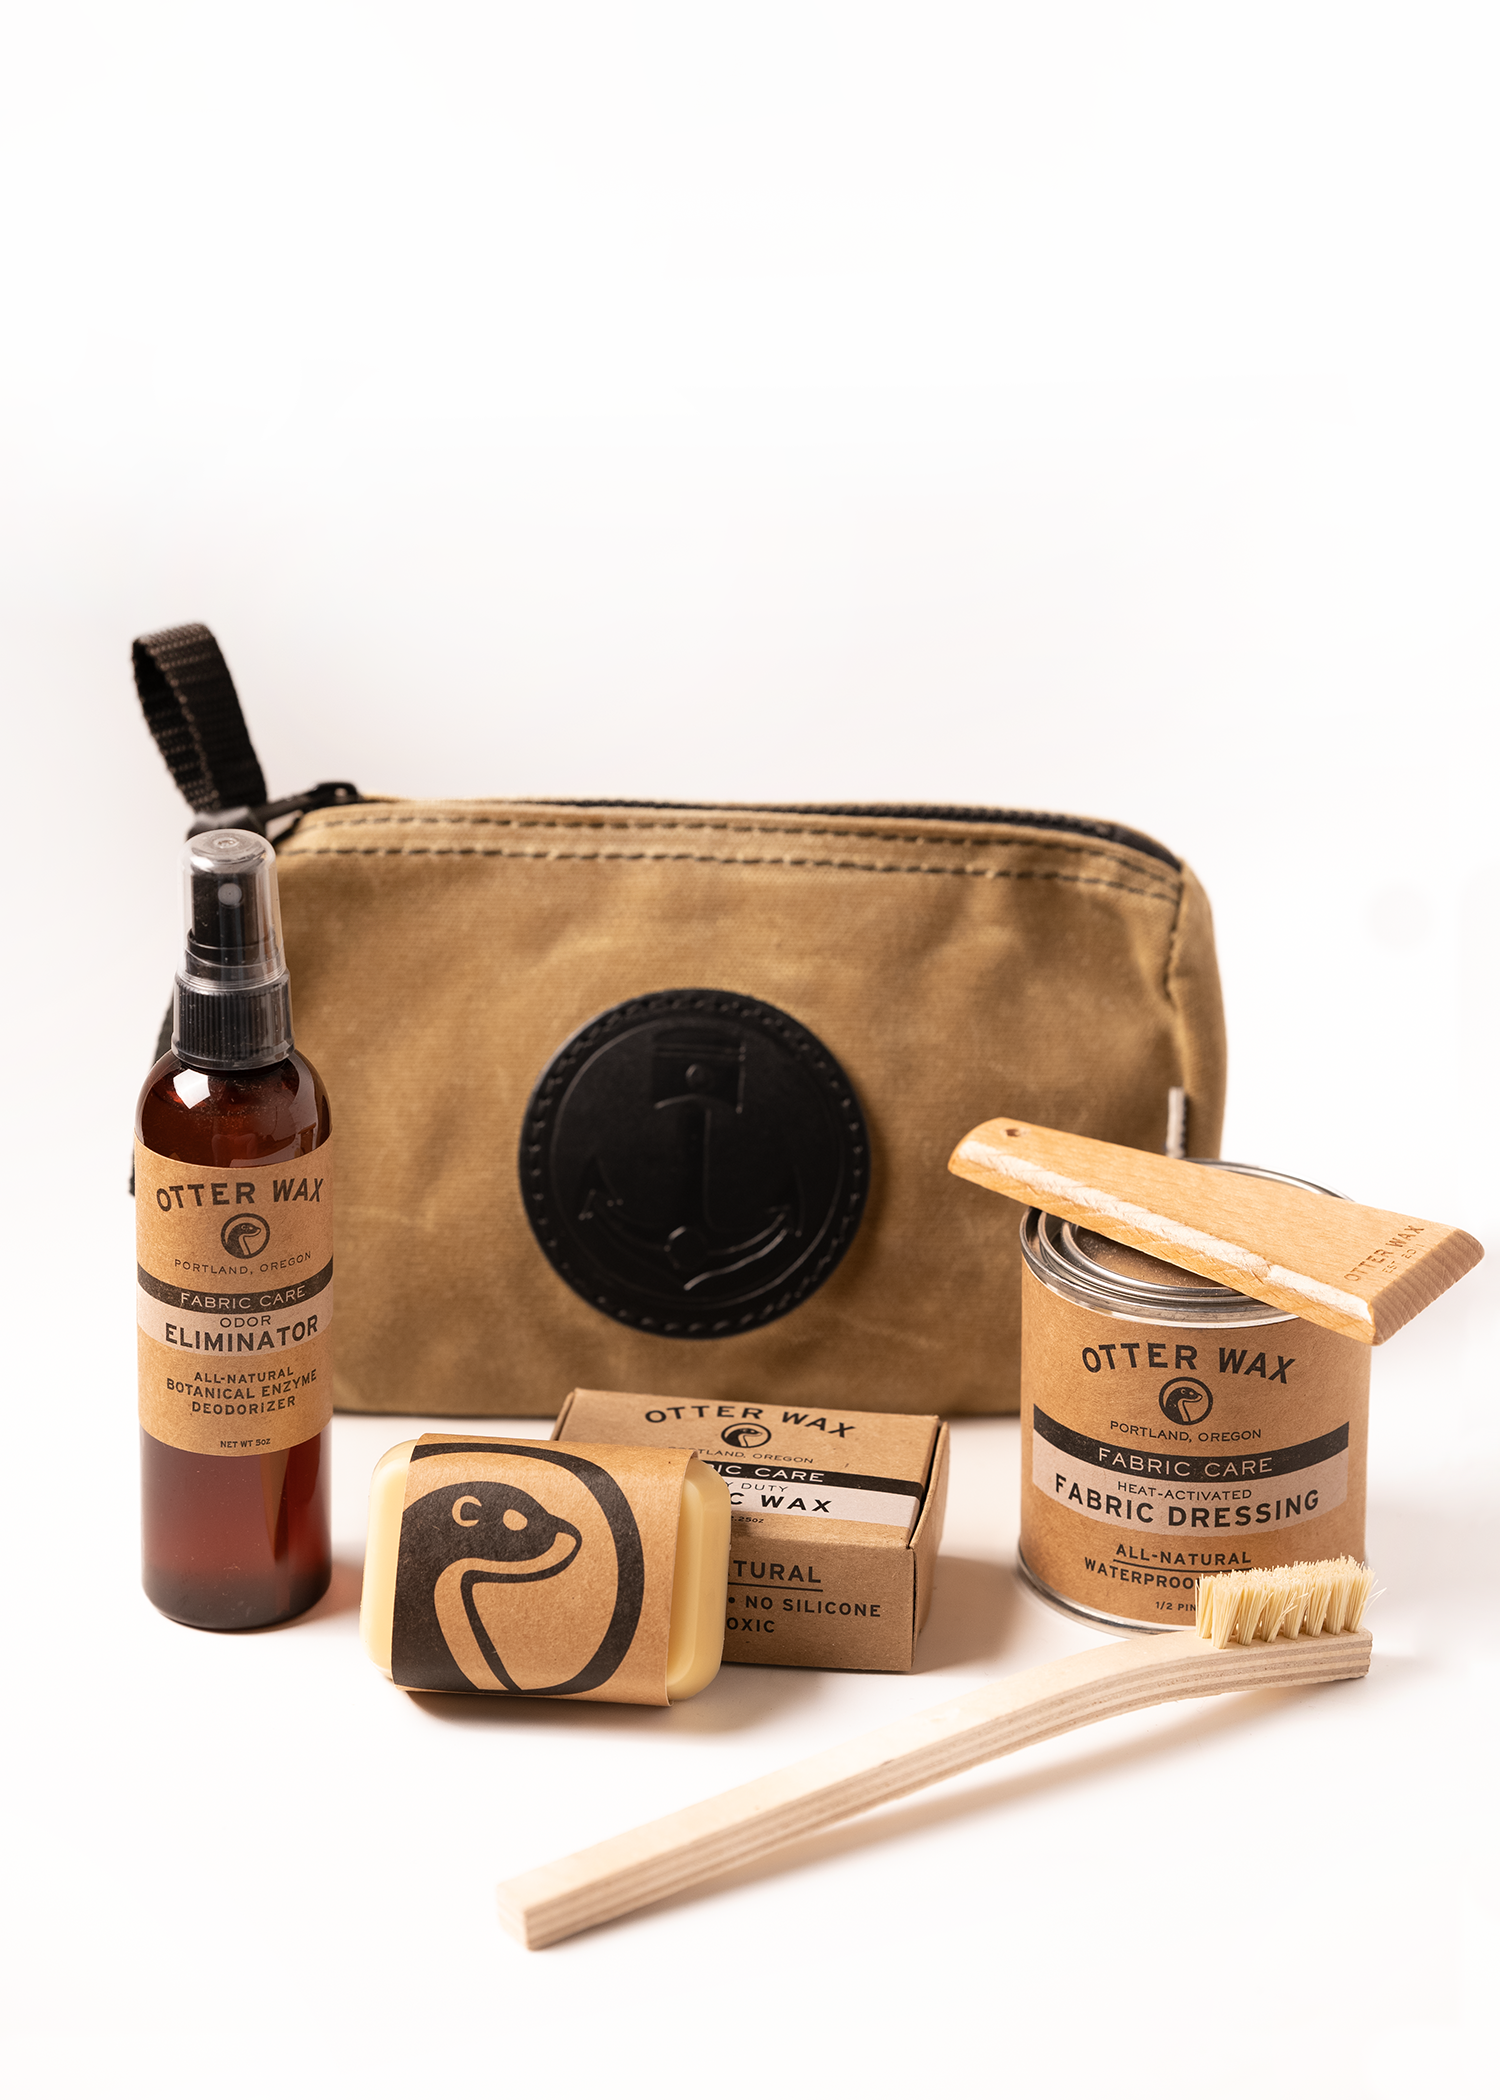 Otter Wax - Leather Care Kit